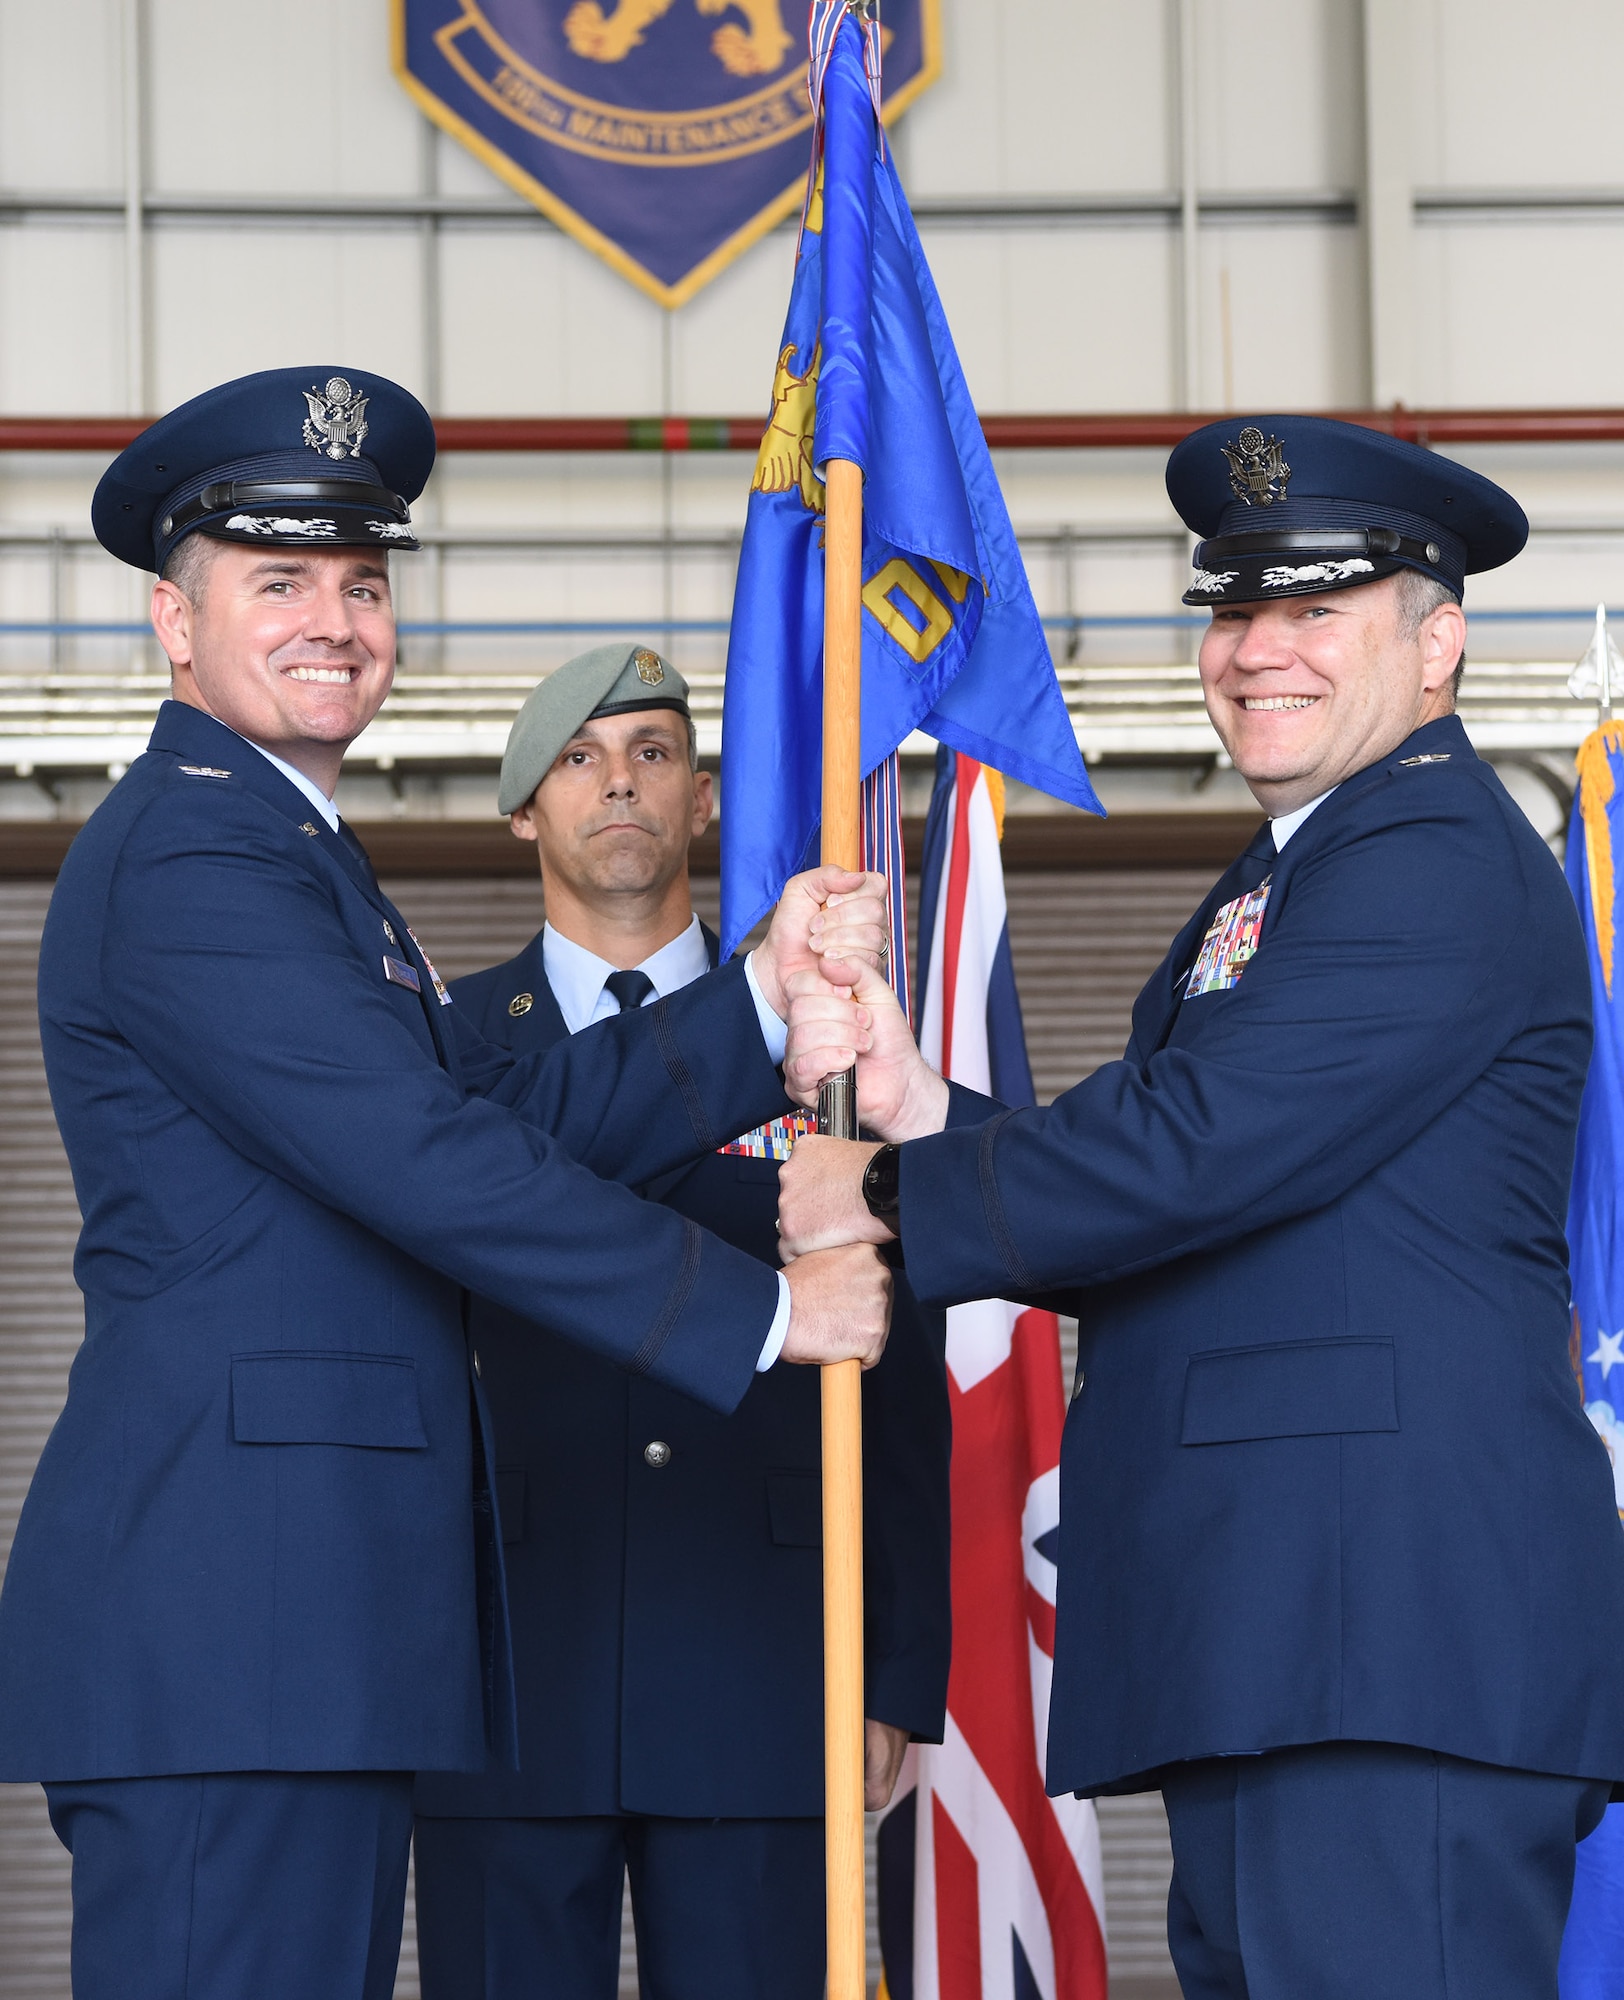 U.S. Air Force Col. Gene Jacobus, left, 100th Air Refueling Wing commander, passes the guidon to Col. Thomas Hutton, new 100th Operations Group commander, during a change of command ceremony at Royal Air Force Mildenhall, England, June 16, 2022. Passing the guidon is a formal process during a change of command ceremony and signifies the transfer of leadership from one officer to another. (U.S. Air Force photo by Karen Abeyasekere)